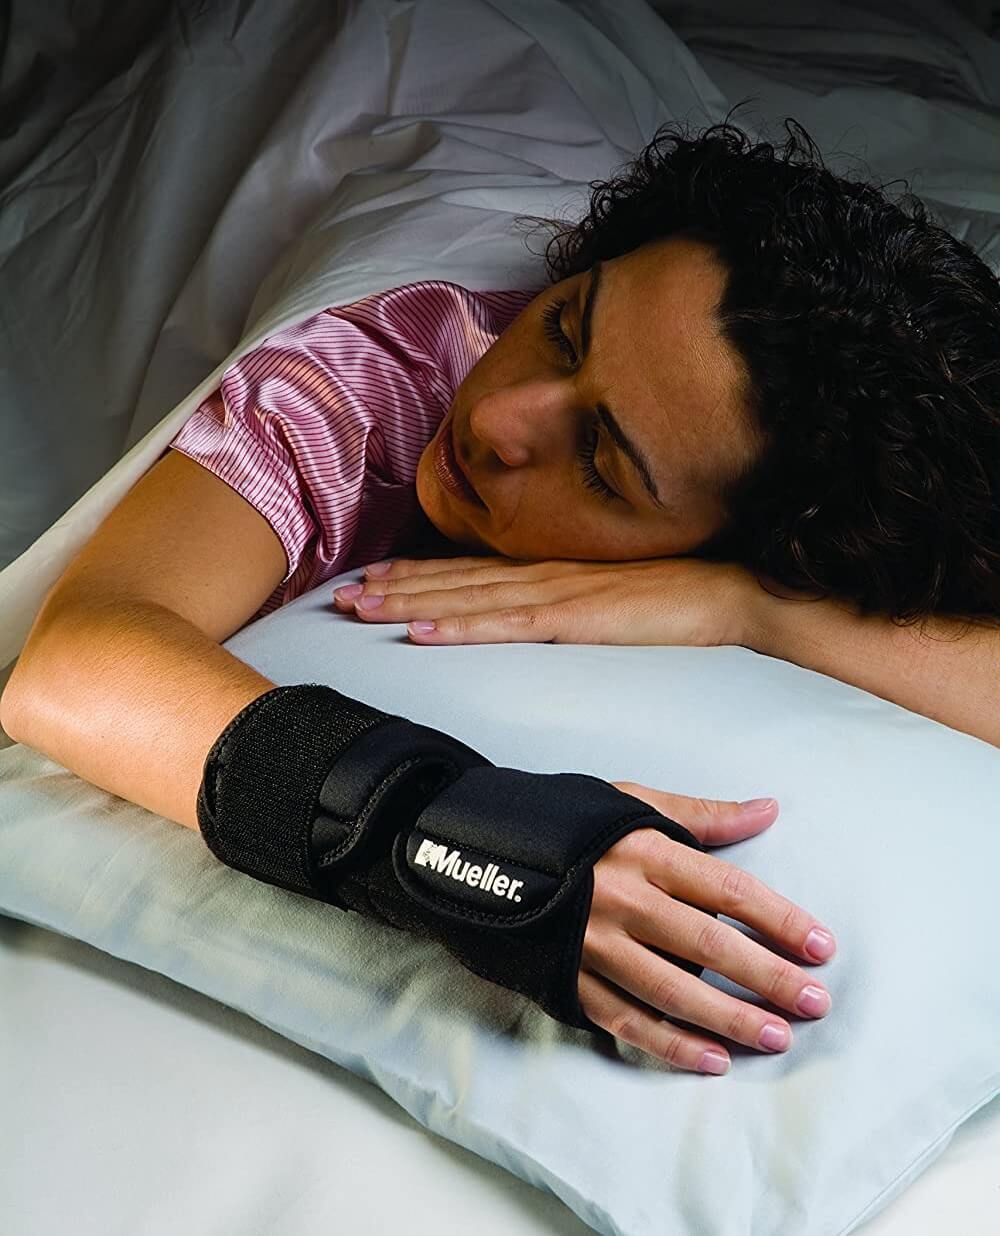 Wrist Brace, Wrist Sleep Support Brace Wrist Support with Splints ,Hand  Support for Carpal Tunnel Arthritis Tendonitis Relieve Sprain Recovery Pain  Relief, Adjustable (One Size, Left Hand) One Size Left Hand